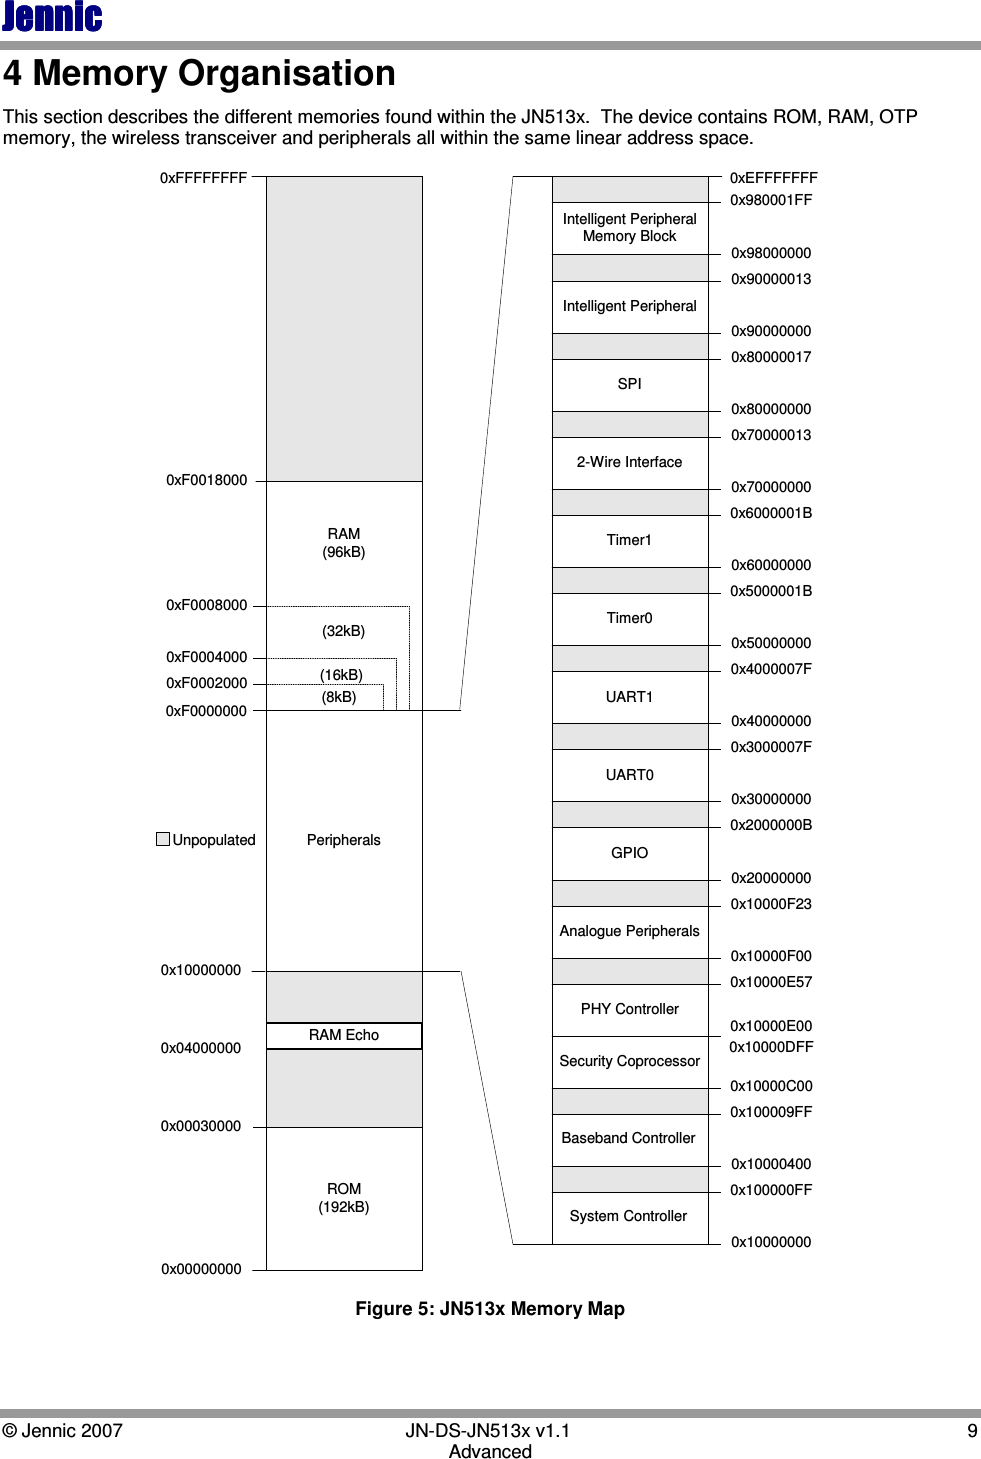 JennicJennicJennicJennic    © Jennic 2007        JN-DS-JN513x v1.1  9 Advanced 4 Memory Organisation This section describes the different memories found within the JN513x.  The device contains ROM, RAM, OTP memory, the wireless transceiver and peripherals all within the same linear address space. 0x000000000x00030000RAM(96kB)0xF00000000xF0018000System ControllerBaseband ControllerSecurity CoprocessorPHY ControllerAnalogue PeripheralsGPIOUART0UART1Timer0SPIIntelligent Peripheral0x100000FF0x100000000x100004000x100009FF0x10000C000x10000DFF0x10000E000x10000E570x10000F000x10000F230x200000000x2000000B0x300000000x3000007F0x400000000x4000007F0x500000000x5000001B0x600000000x6000001B0x700000000x700000130x80000000Timer12-Wire Interface0x800000170x900000000x900000130x98000000Intelligent PeripheralMemory Block0x980001FF0xEFFFFFFF0xFFFFFFFFPeripheralsUnpopulatedROM(192kB)0x100000000xF00080000xF00040000xF0002000   (32kB)     (16kB)       (8kB)RAM Echo0x04000000 Figure 5: JN513x Memory Map 